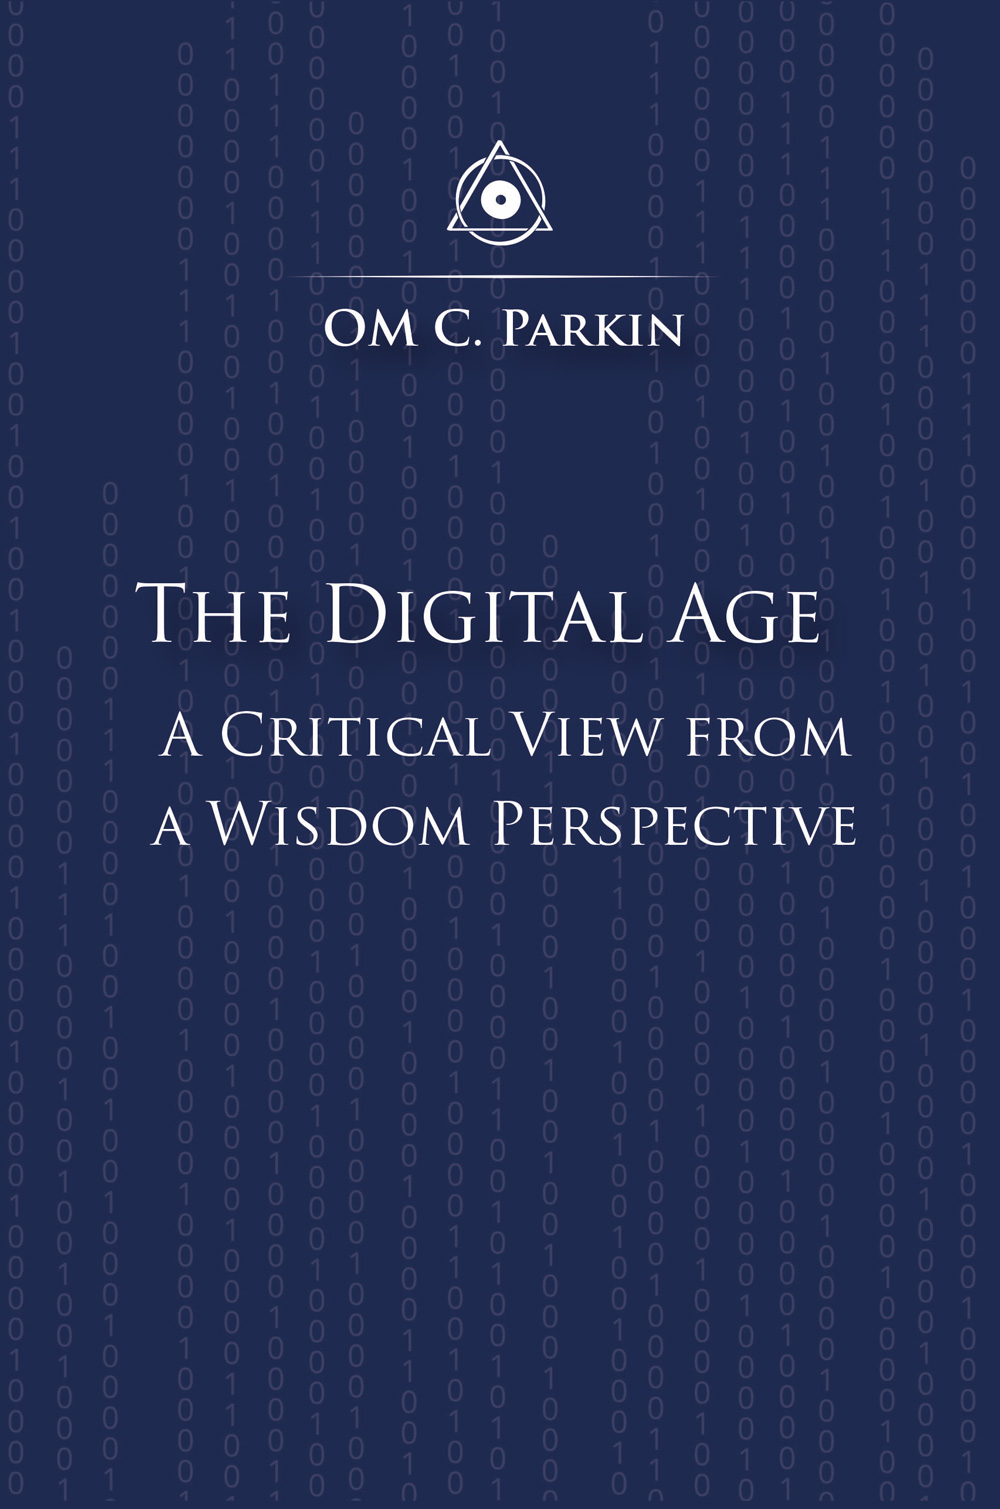 The Digital Age - A Critical View from a Wisdom Perspective